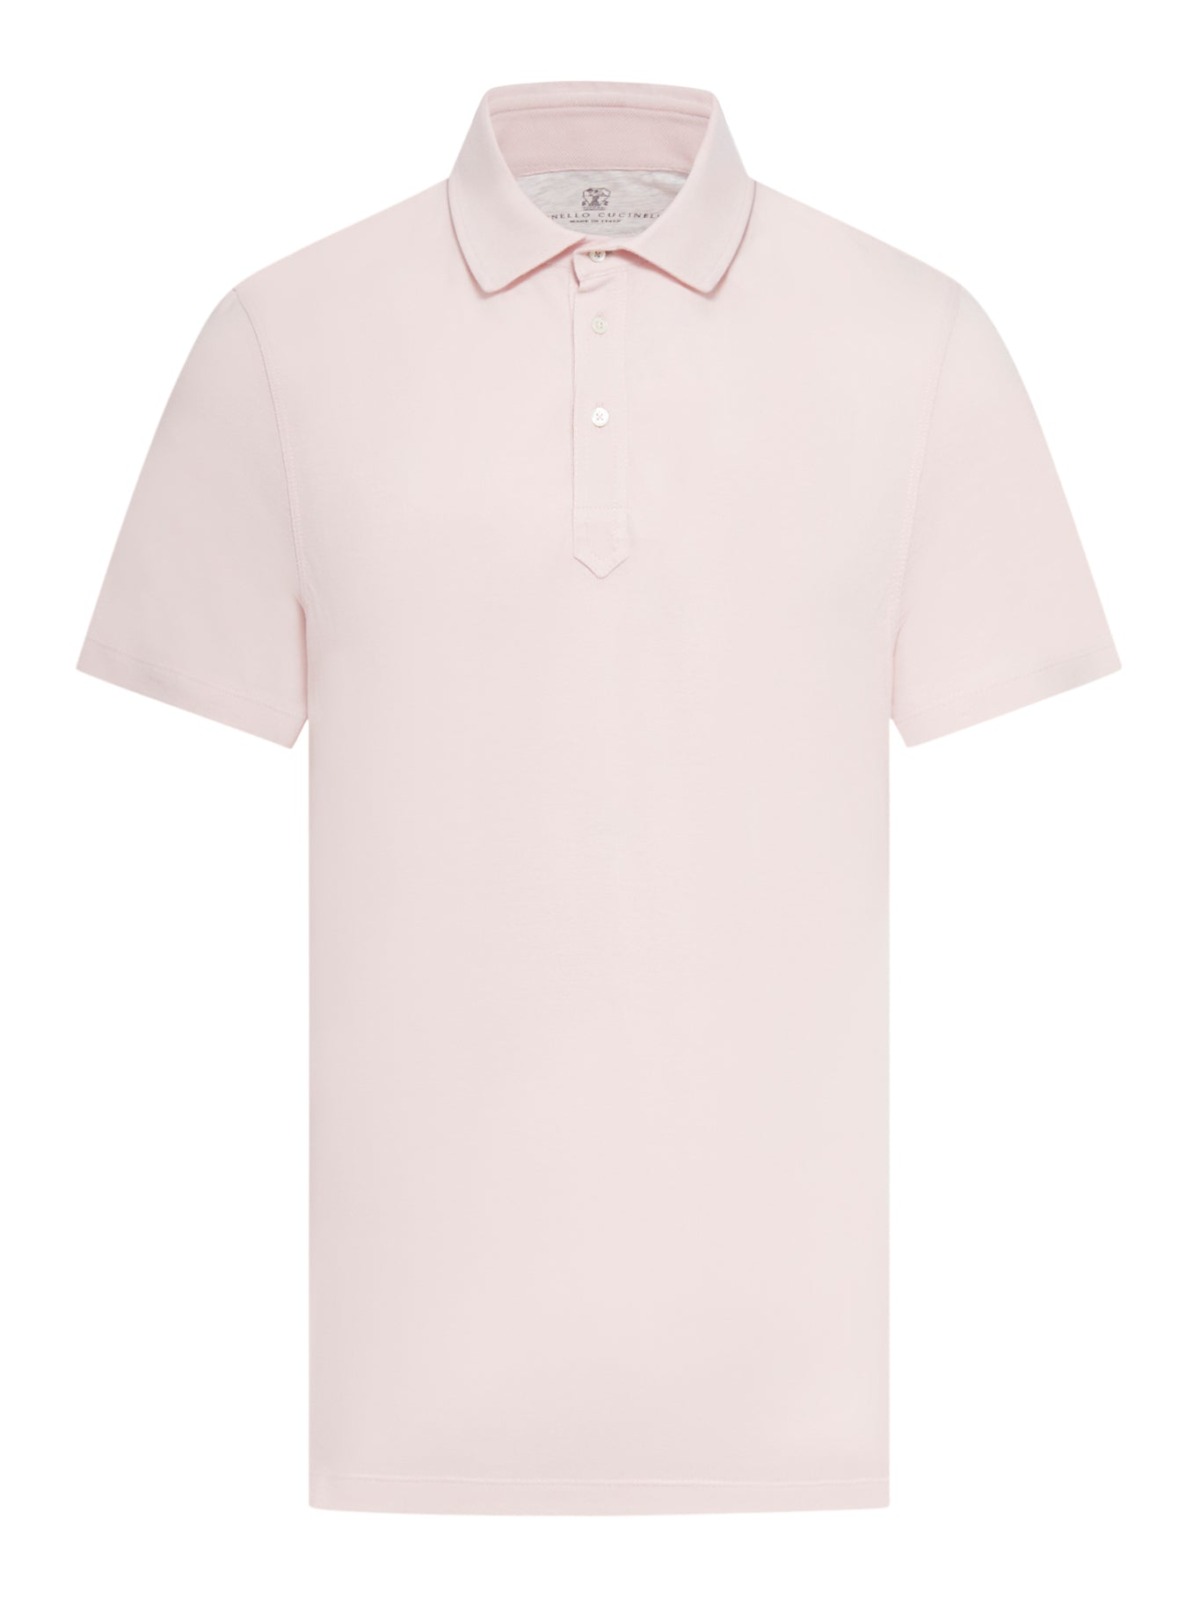 Brunello Cucinelli Poloshirt in Pink by Suitnegozi GOOFASH